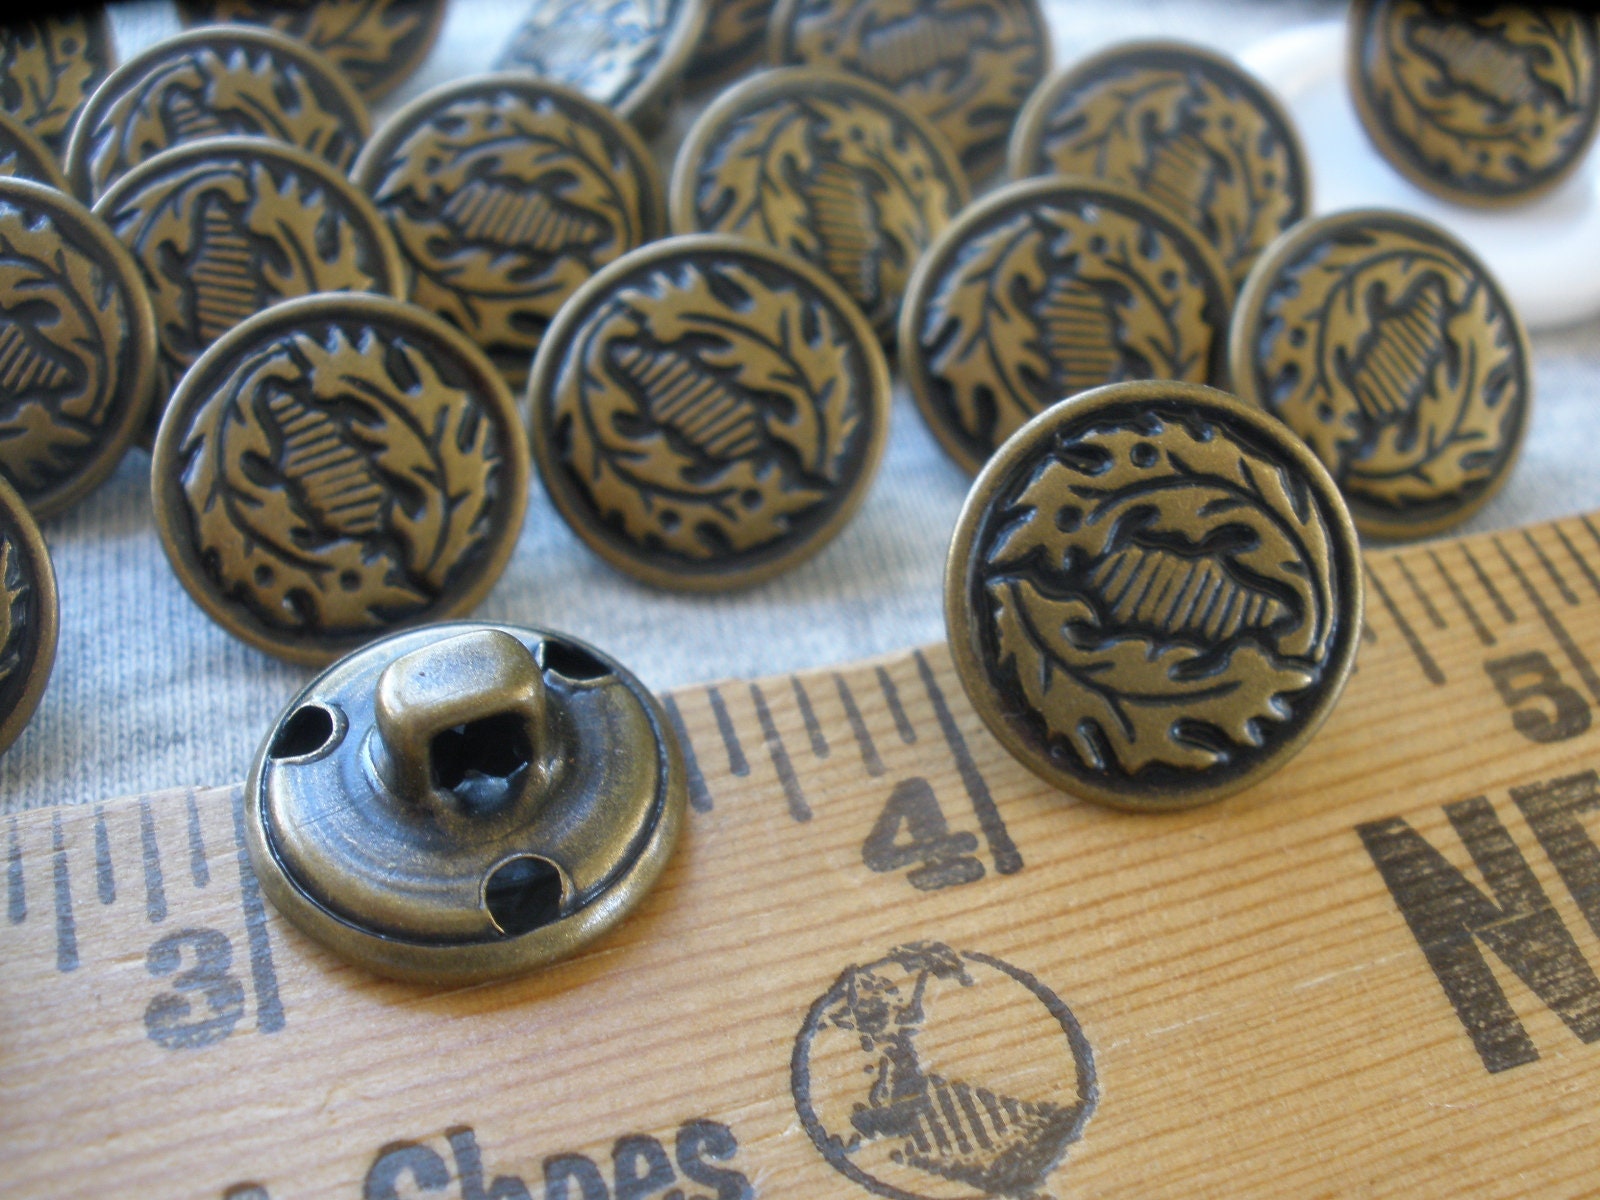 Animal Embossed Metal Vintage Buttons 1 inch (8 pcs)